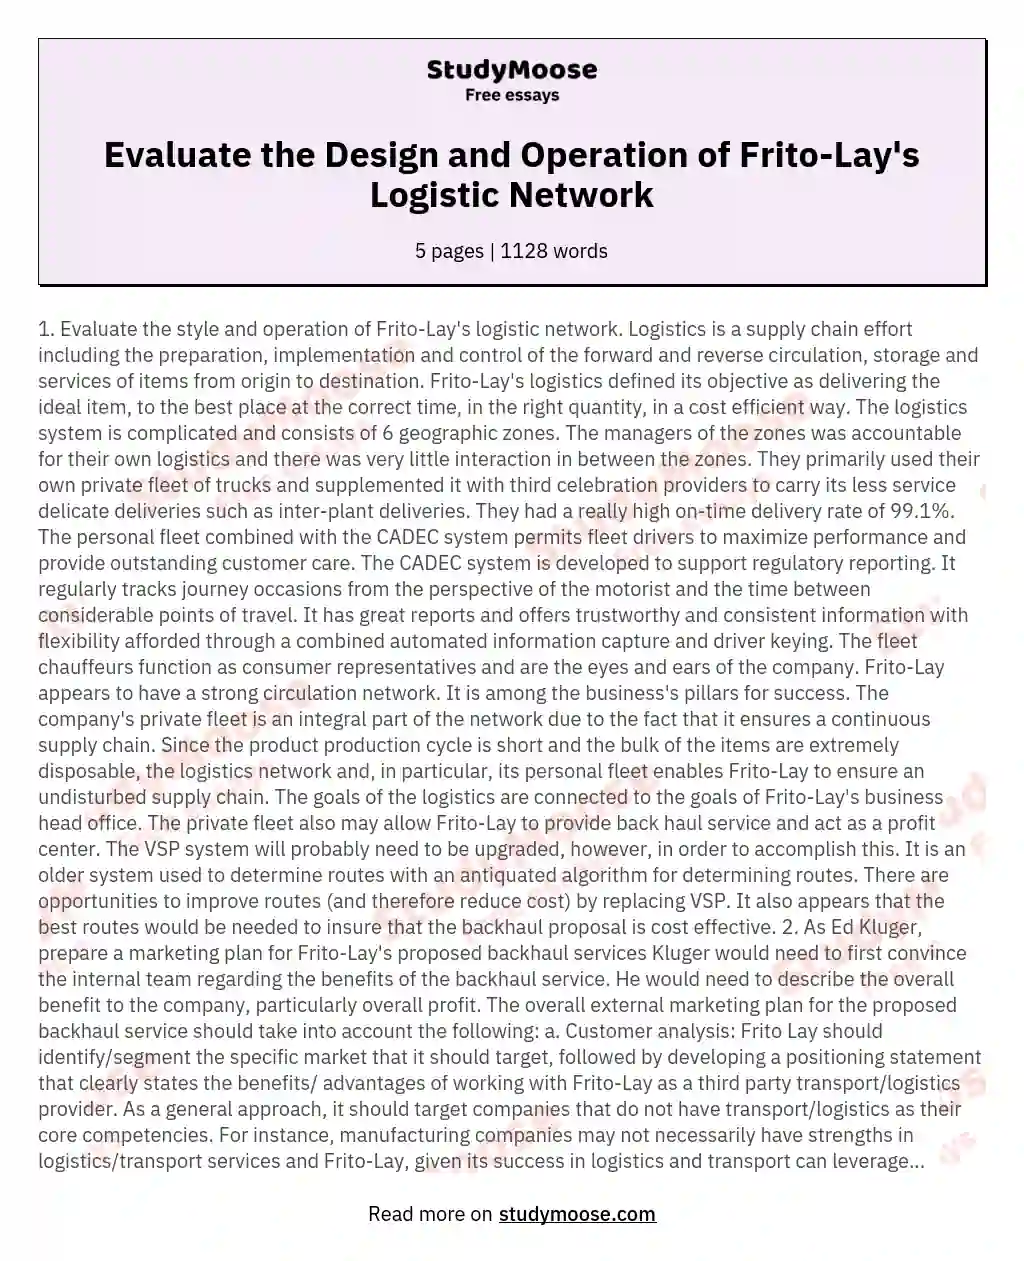 Evaluate the Design and Operation of Frito-Lay's Logistic Network essay